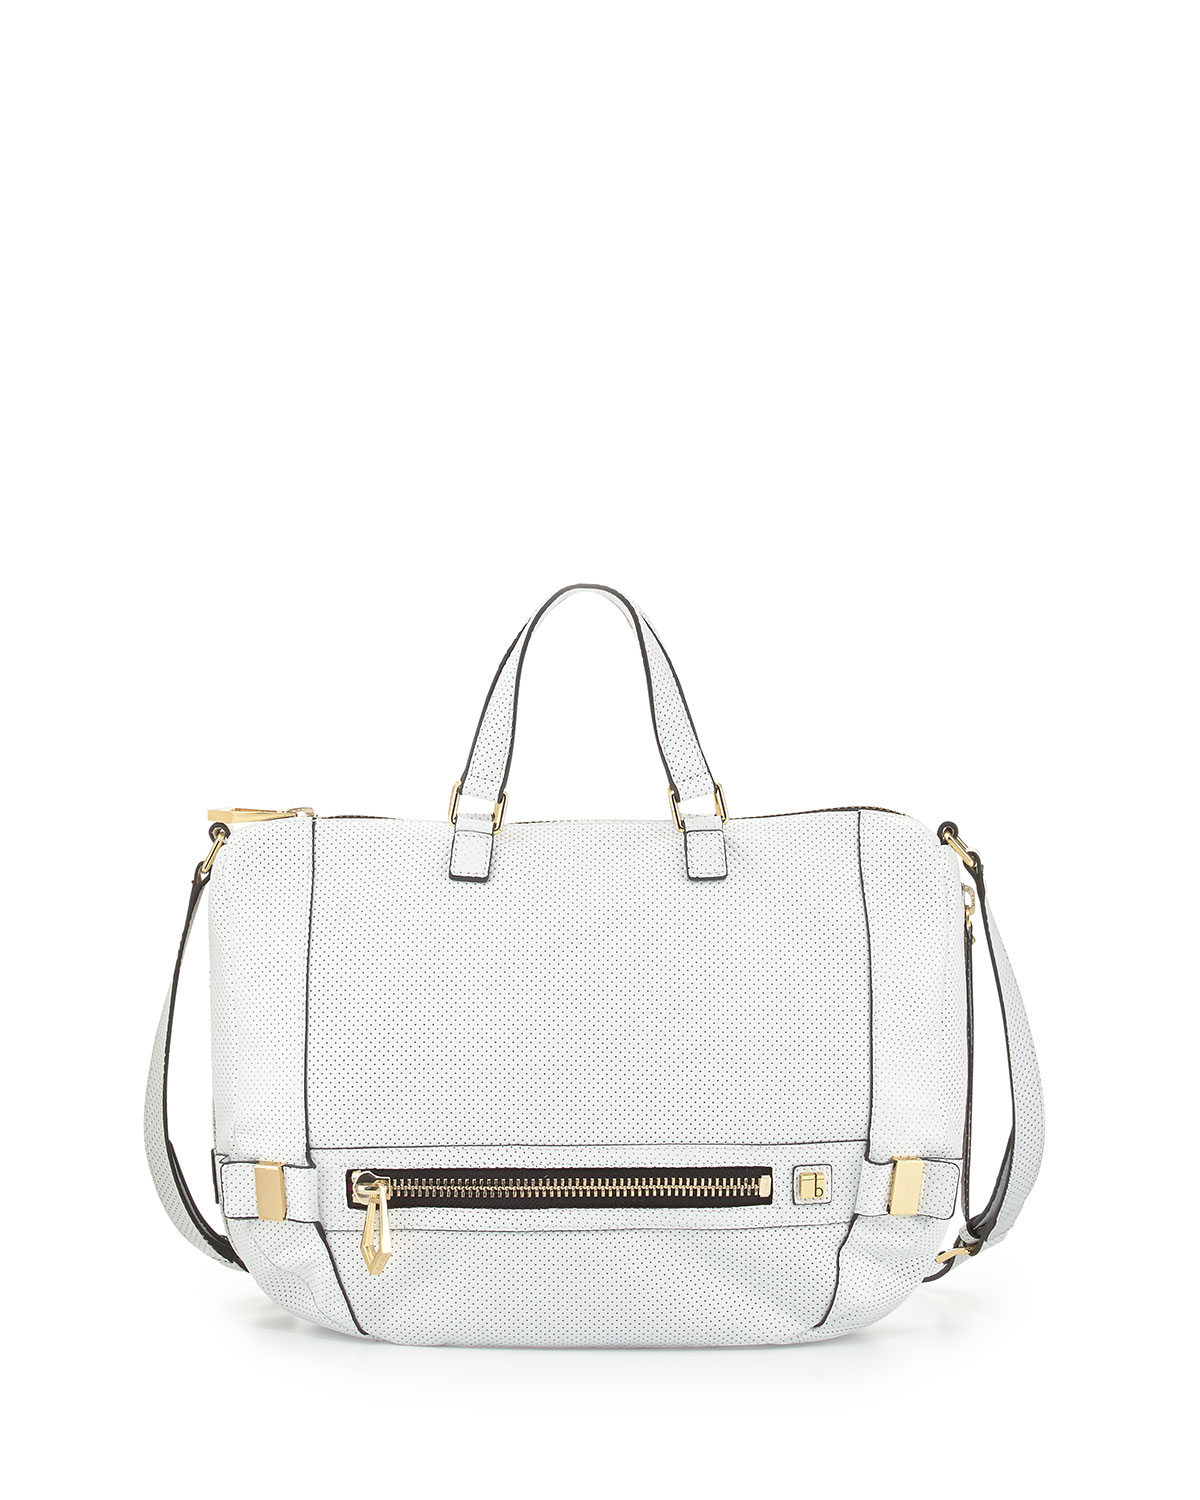 Botkier Honore Perforated Leather Hobo Bag in White | Lyst